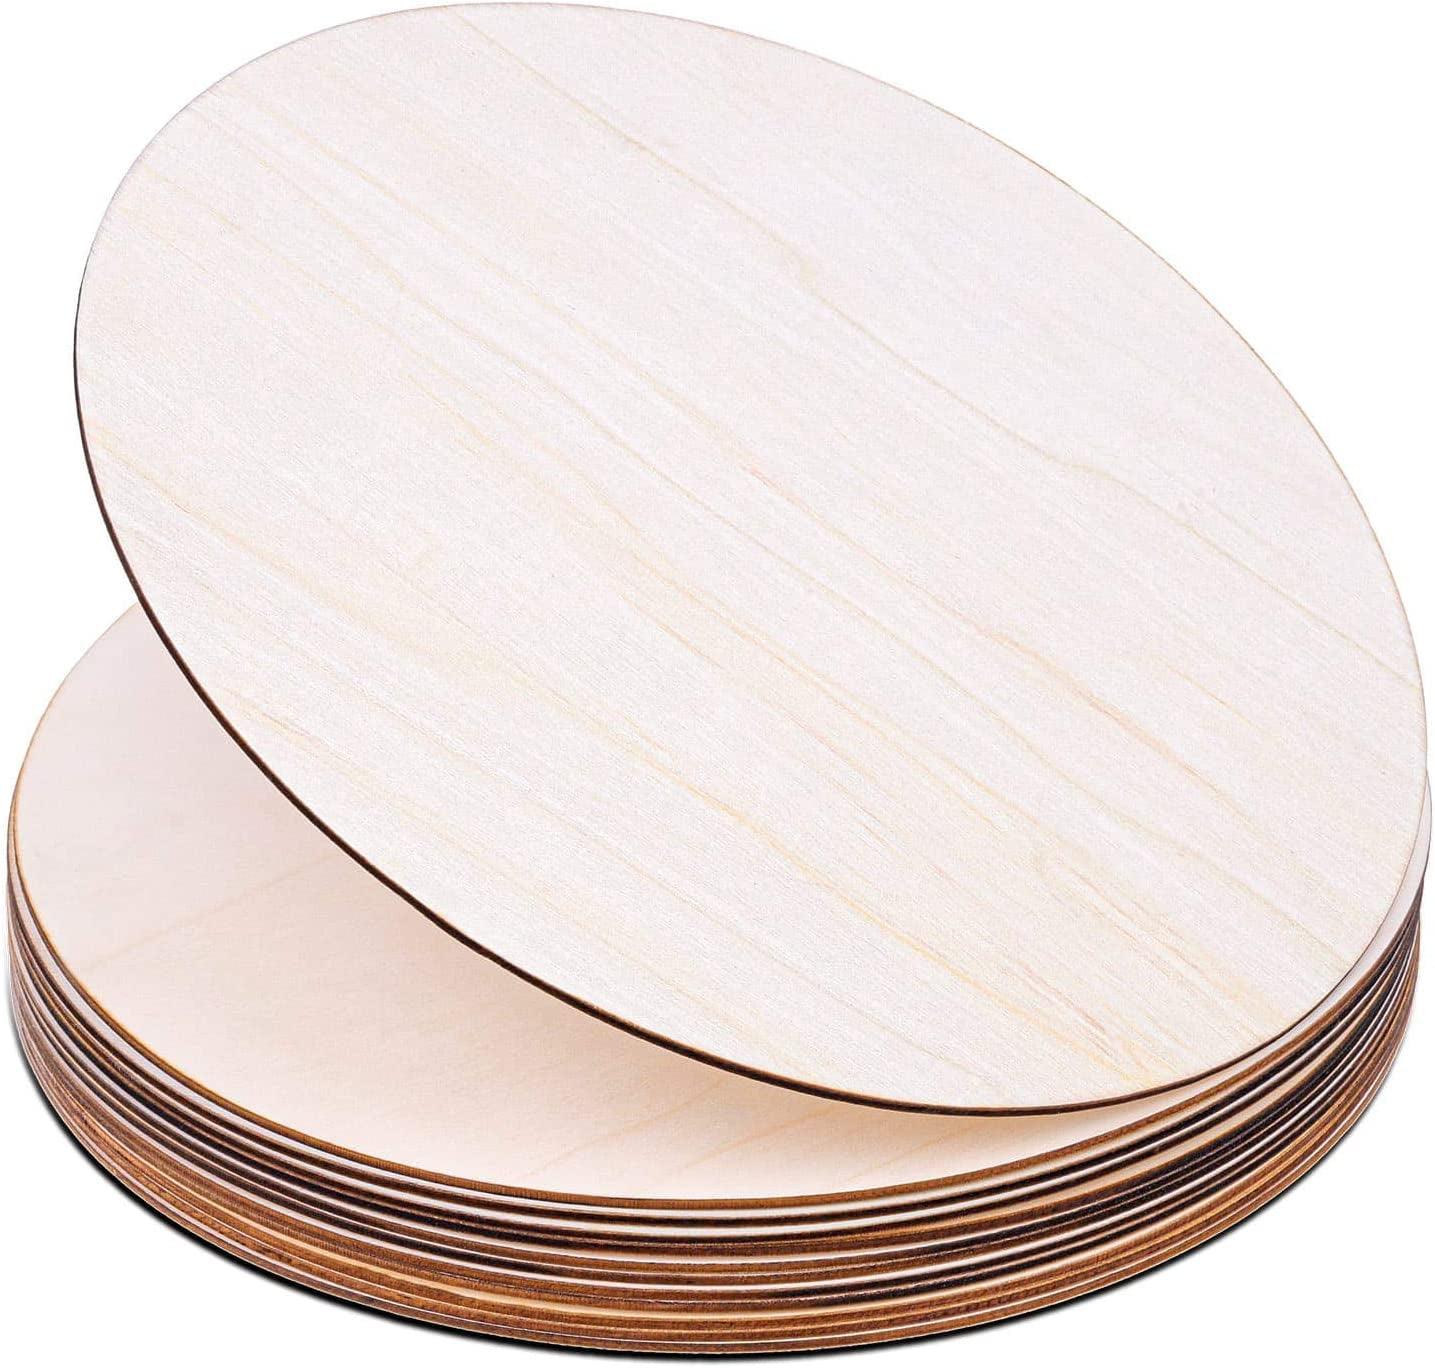 12Pcs 12 Inch Wood Circles for Crafts, Unfinished Blank Wooden